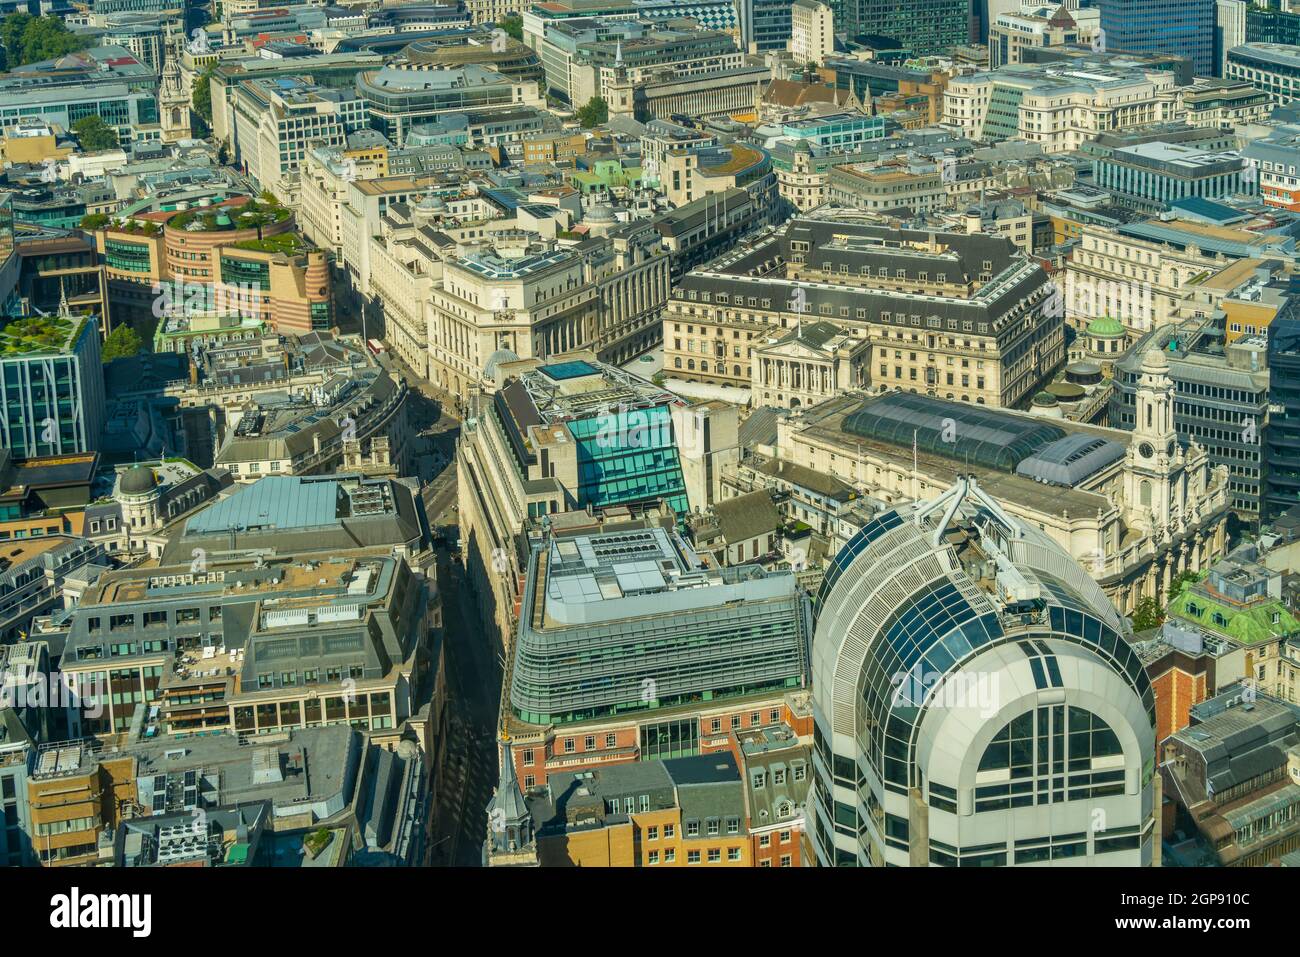 Aerial view of the Bank of England, The Royal Exchange and nearby buildings, London, England, United Kingdom, Europe Stock Photo